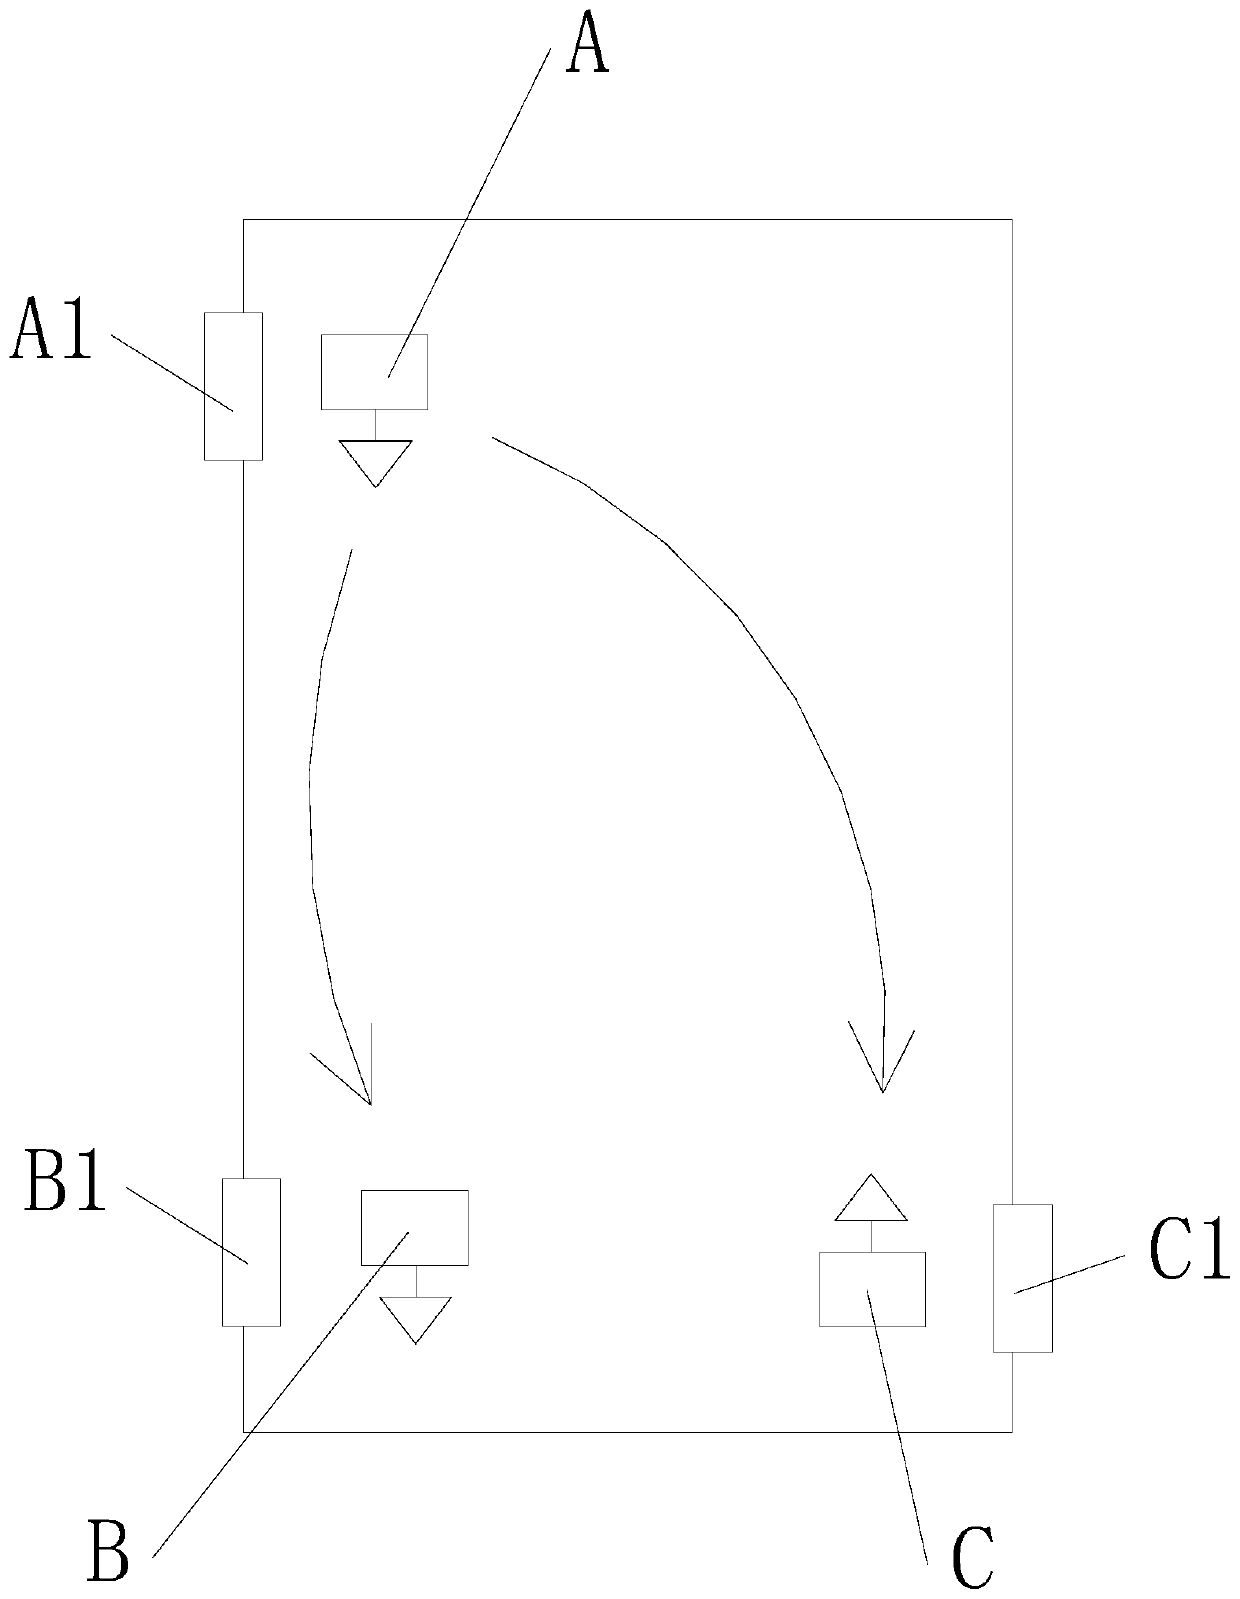 Robot path planning and walking control method and system based on serial numbers